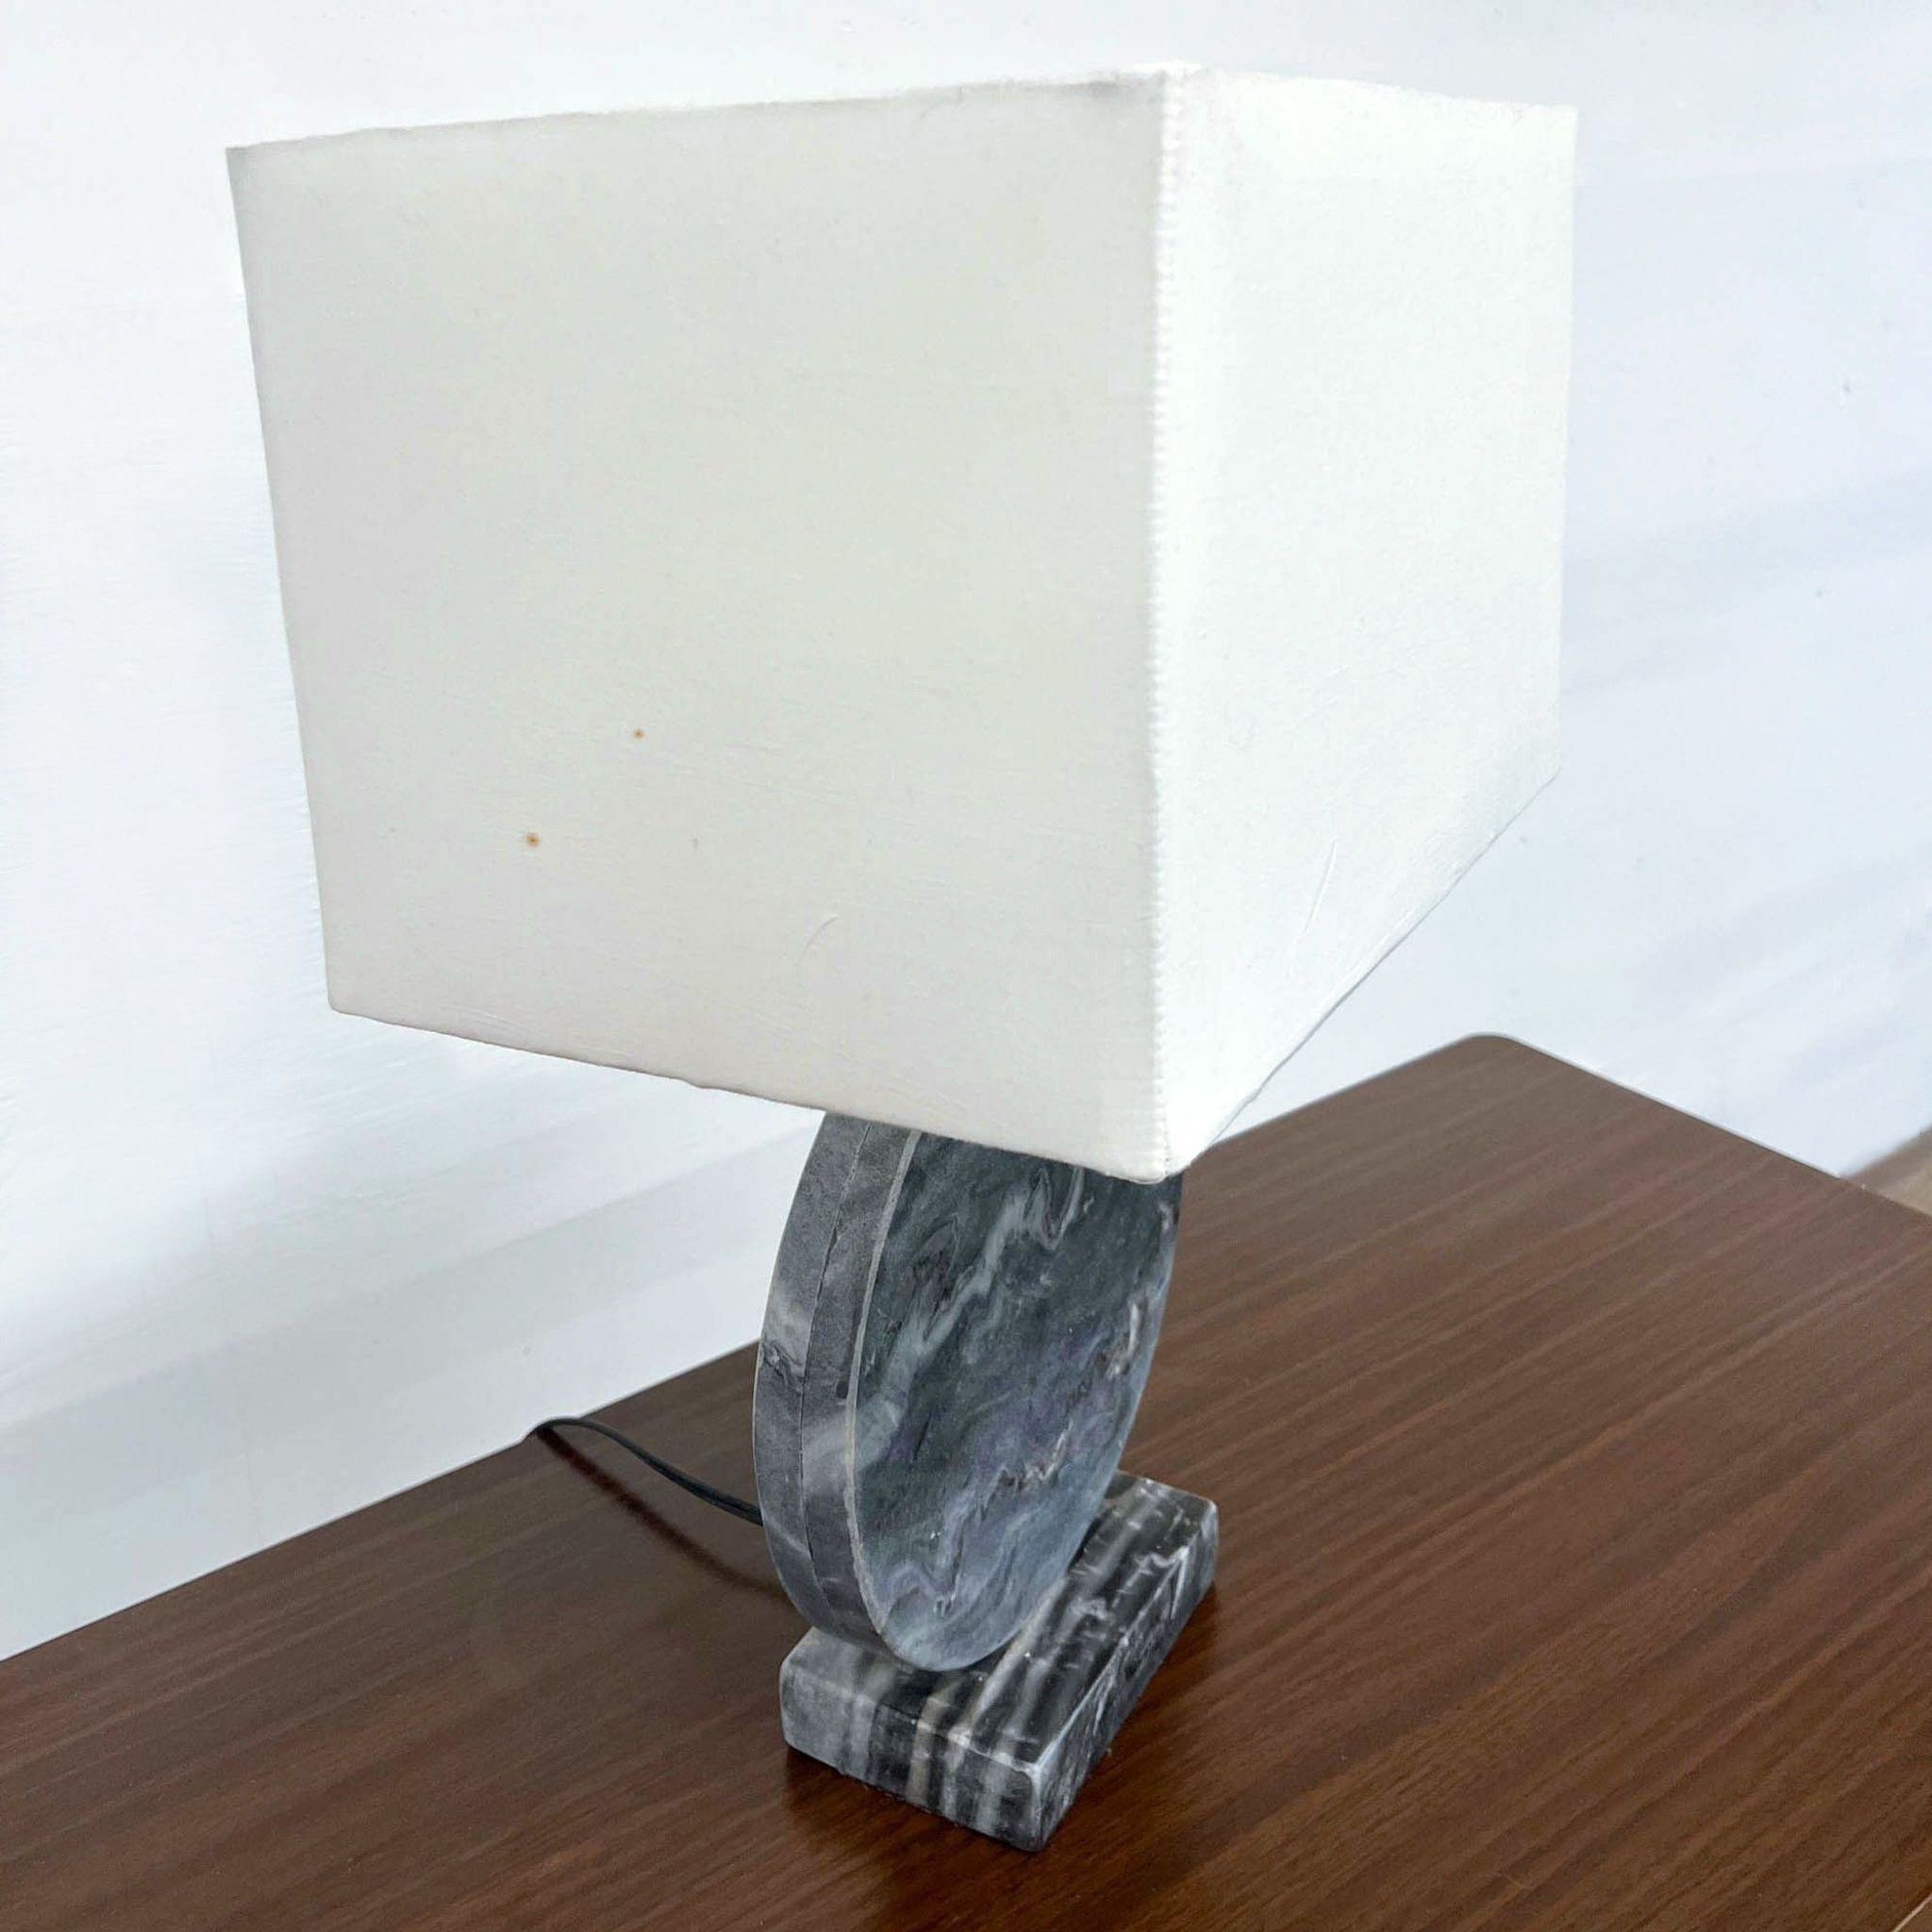 Reperch brand table lamp with square white shade and dark marble base, unplugged, on a wooden table.